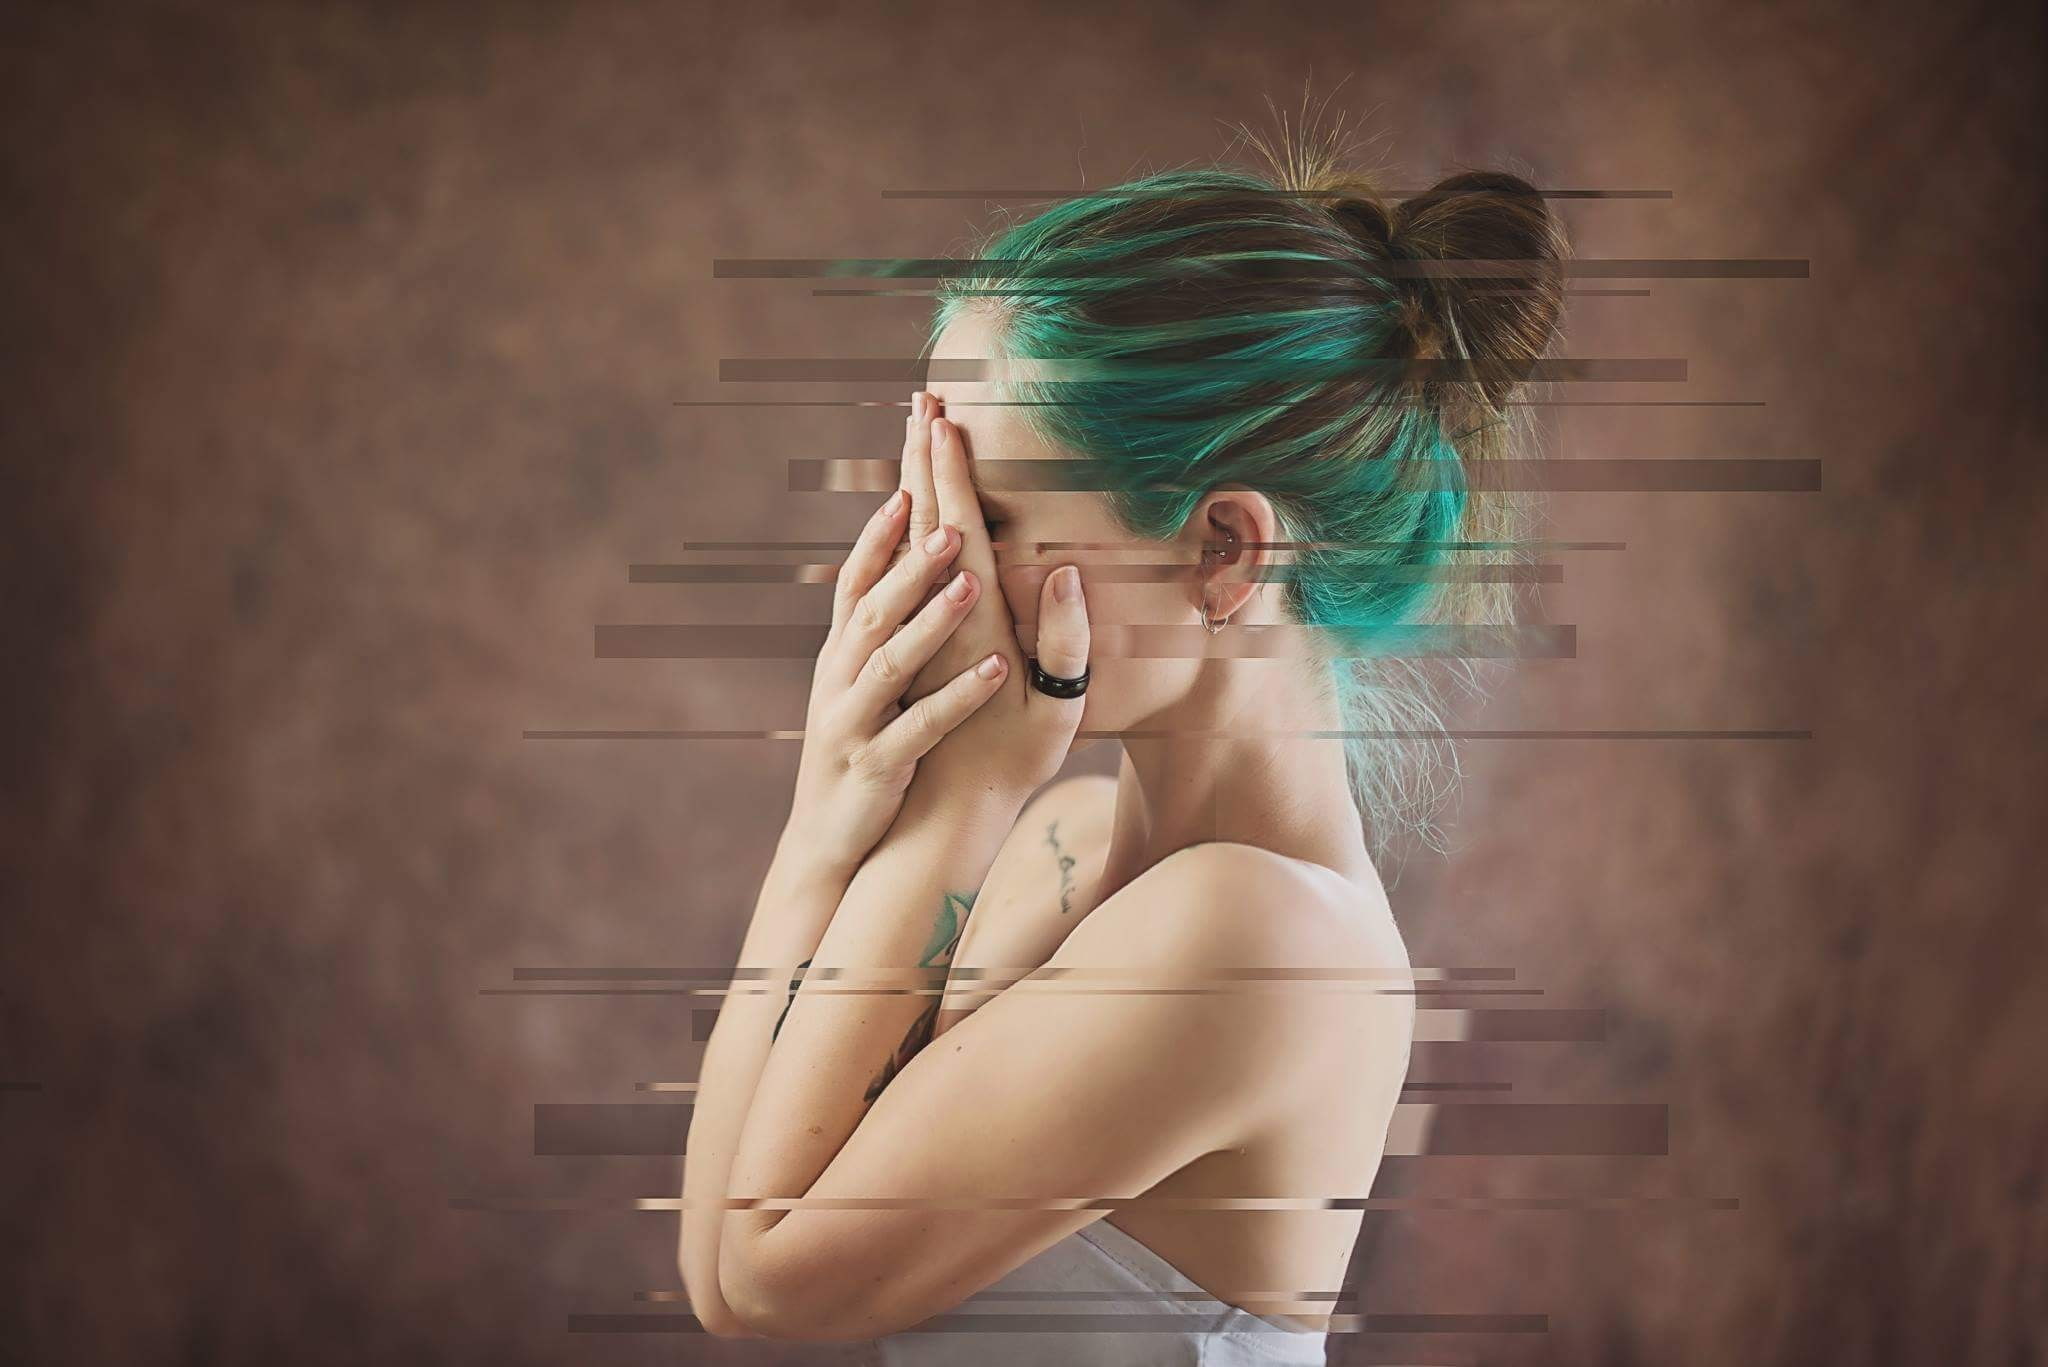 women, dyed hair, covering face, photo manipulation, tattoo